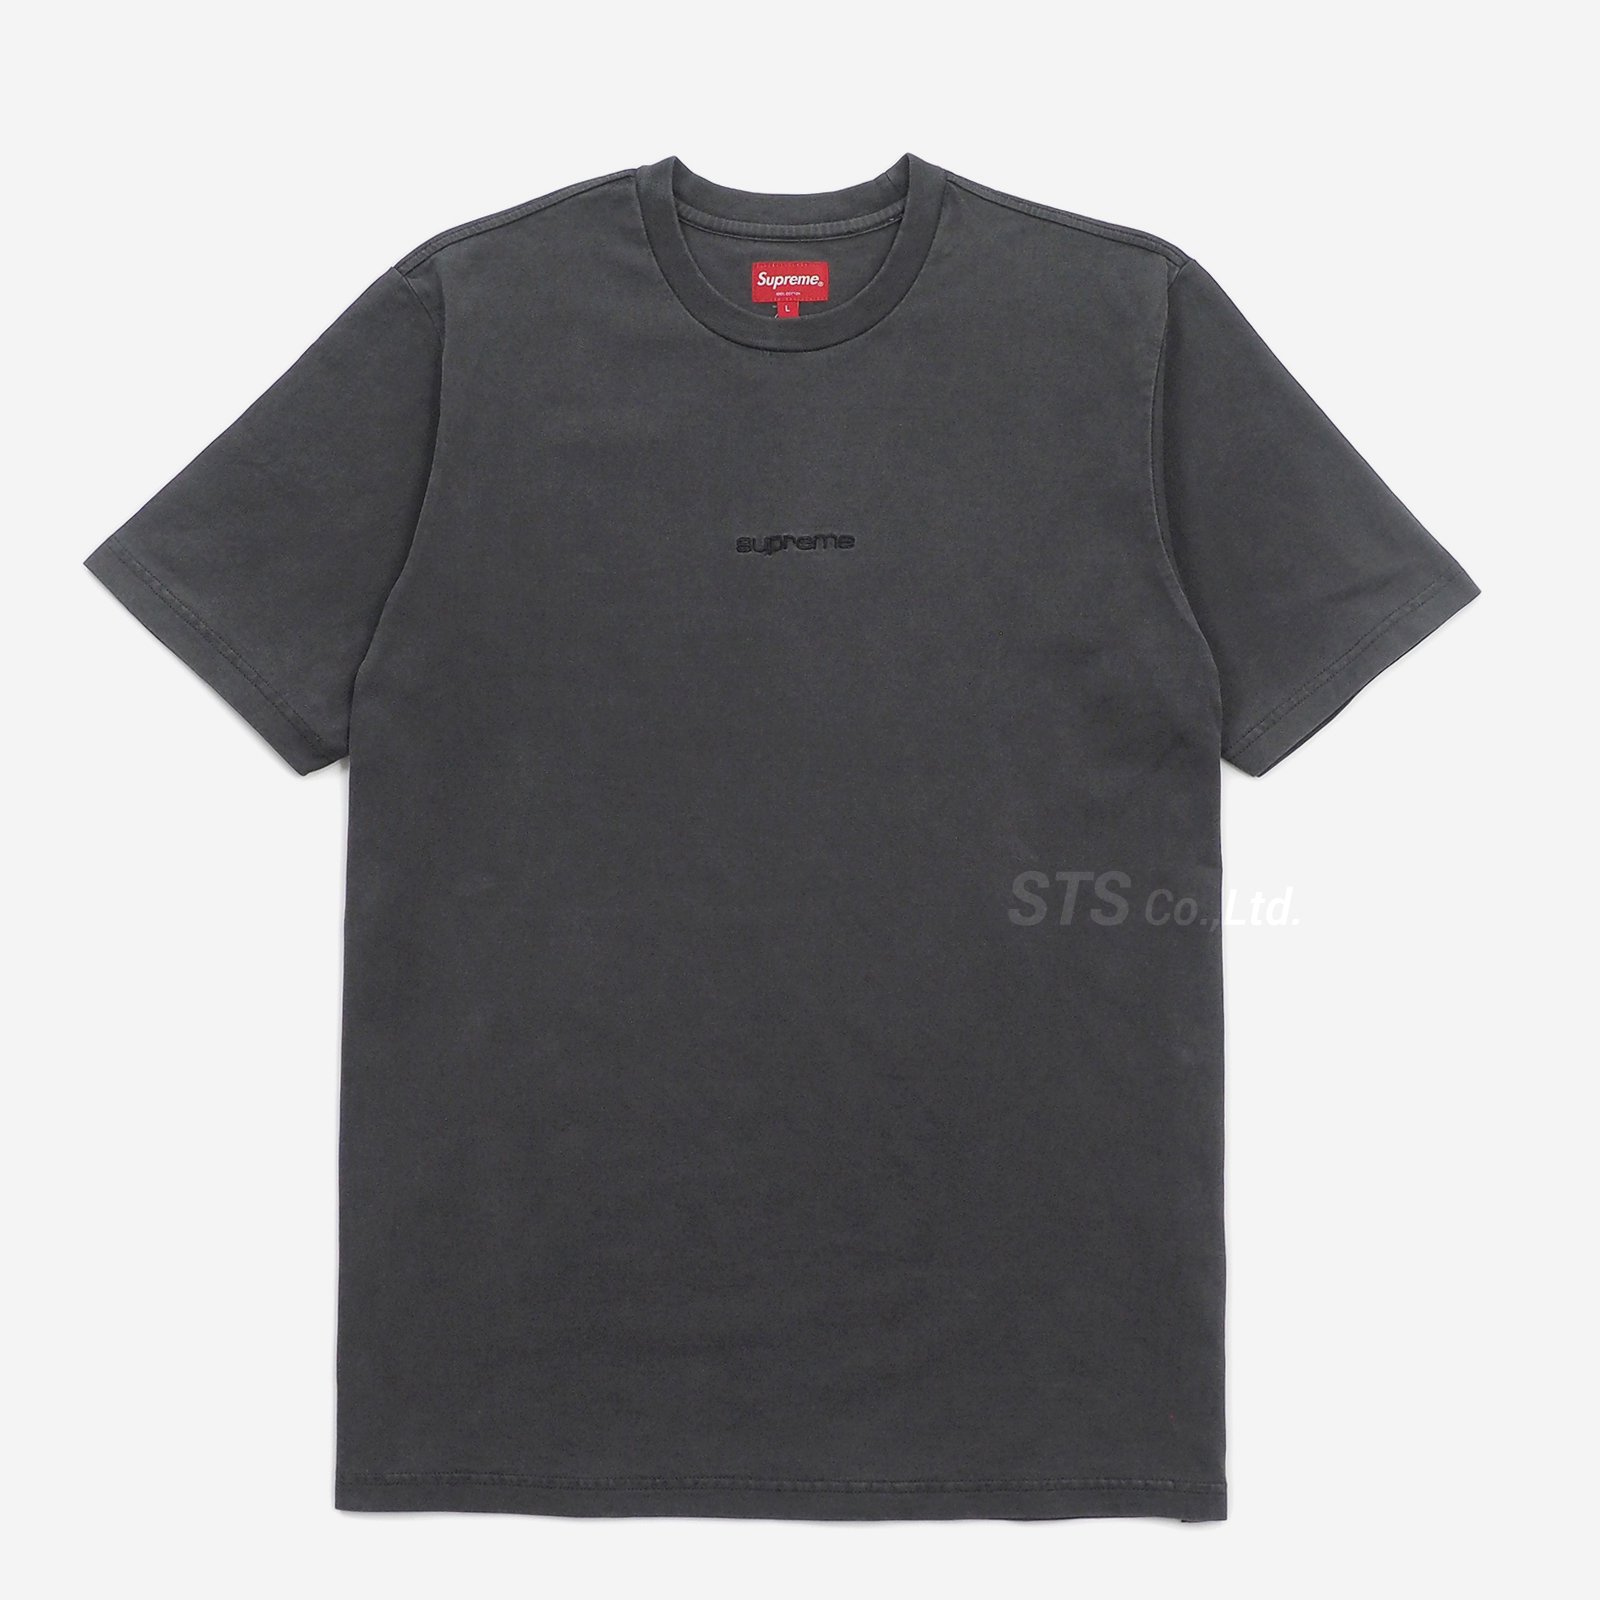 supreme overdyed tee natural 希少XL